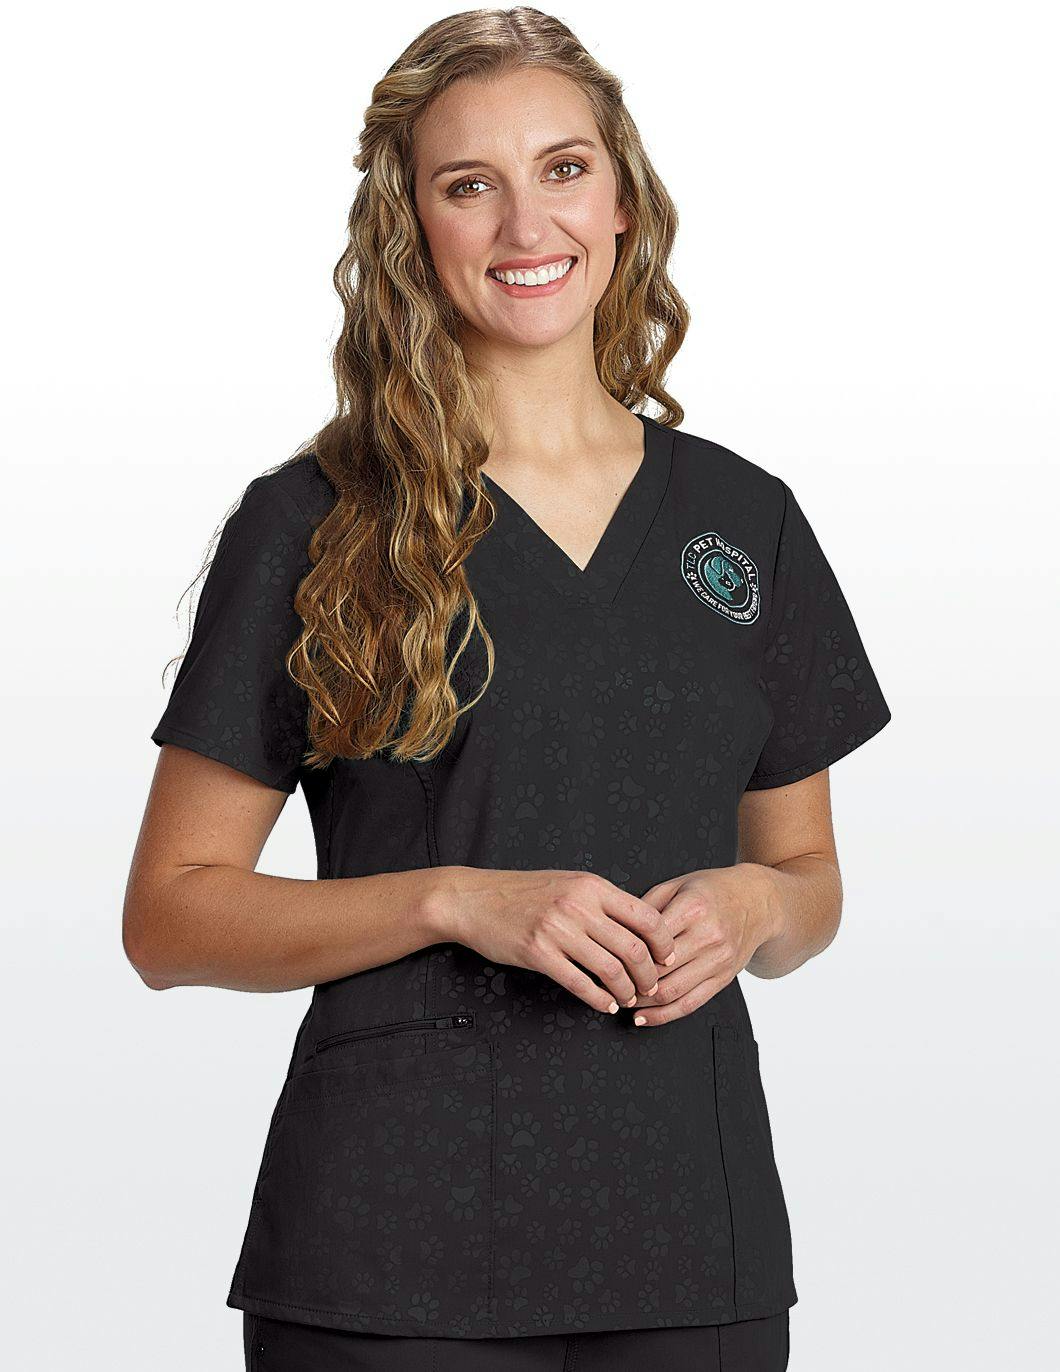 hearts-and-paws-womens-embossed-paw-print-scrub-top-black